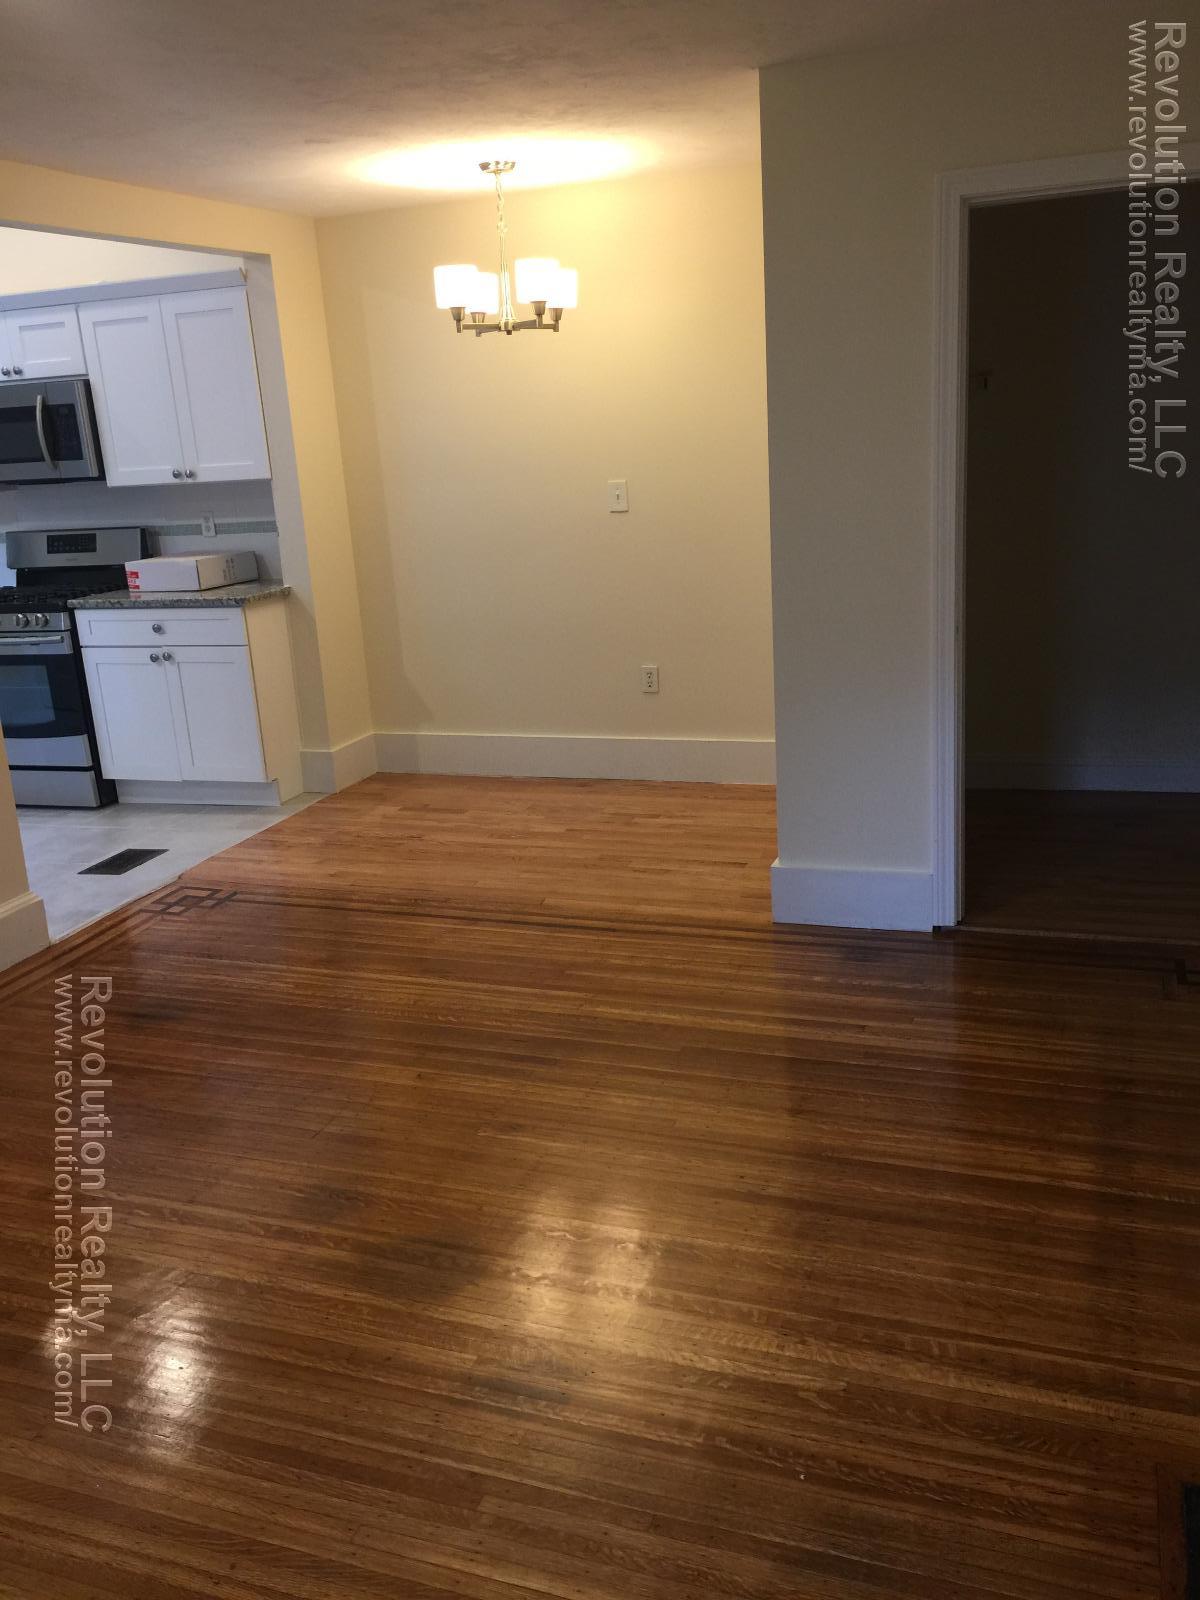 Photos of apartment on Cuba St.,Watertown MA 02472